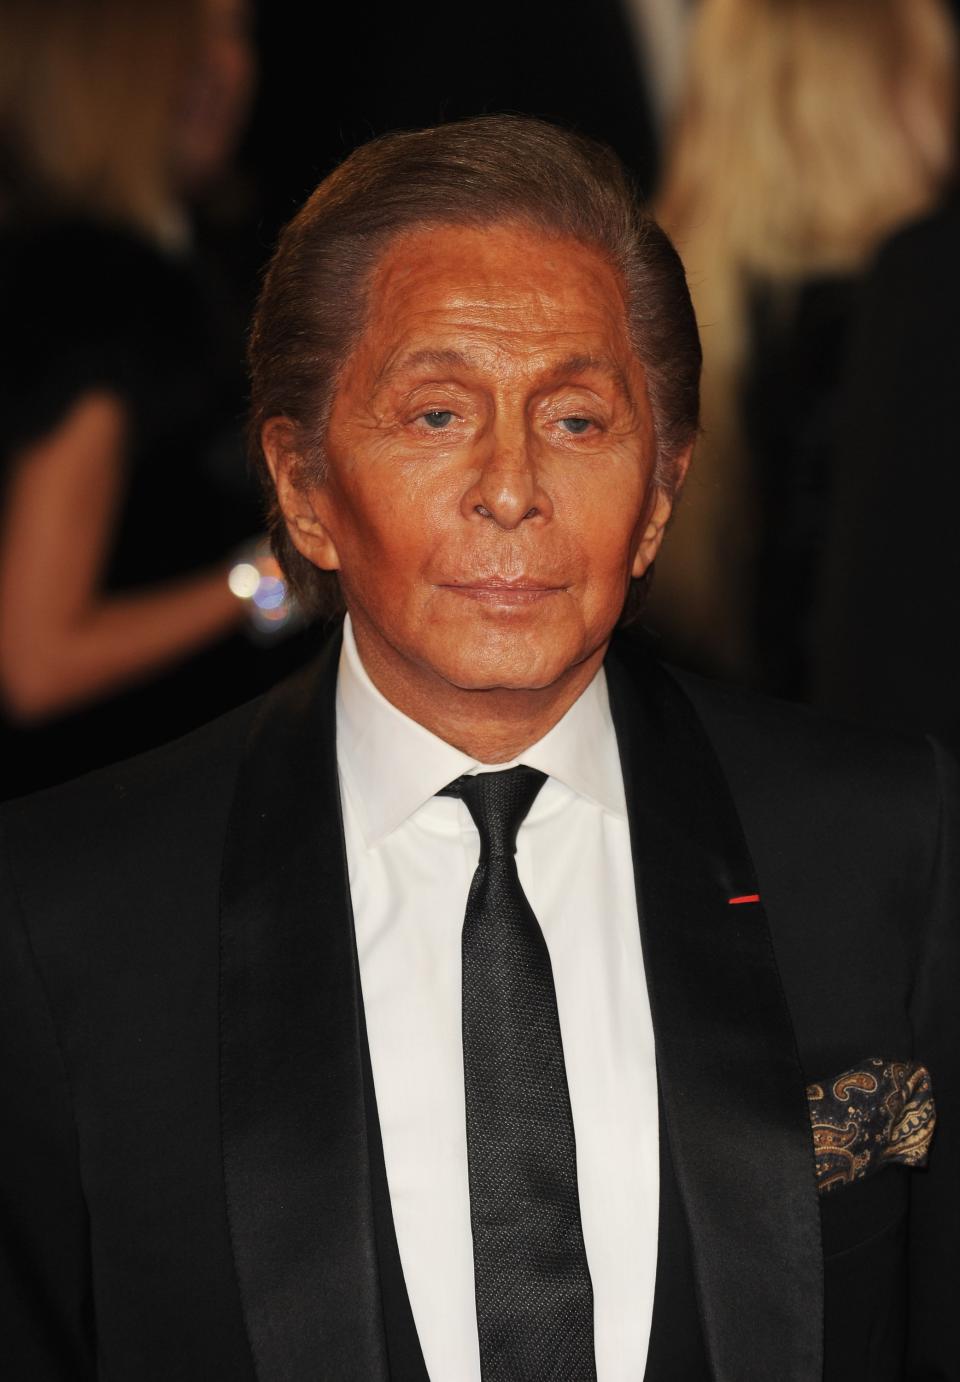 LONDON, ENGLAND - OCTOBER 23: Valentino attends the Royal World Premiere of 'Skyfall' at the Royal Albert Hall on October 23, 2012 in London, England. (Photo by Eamonn McCormack/Getty Images)